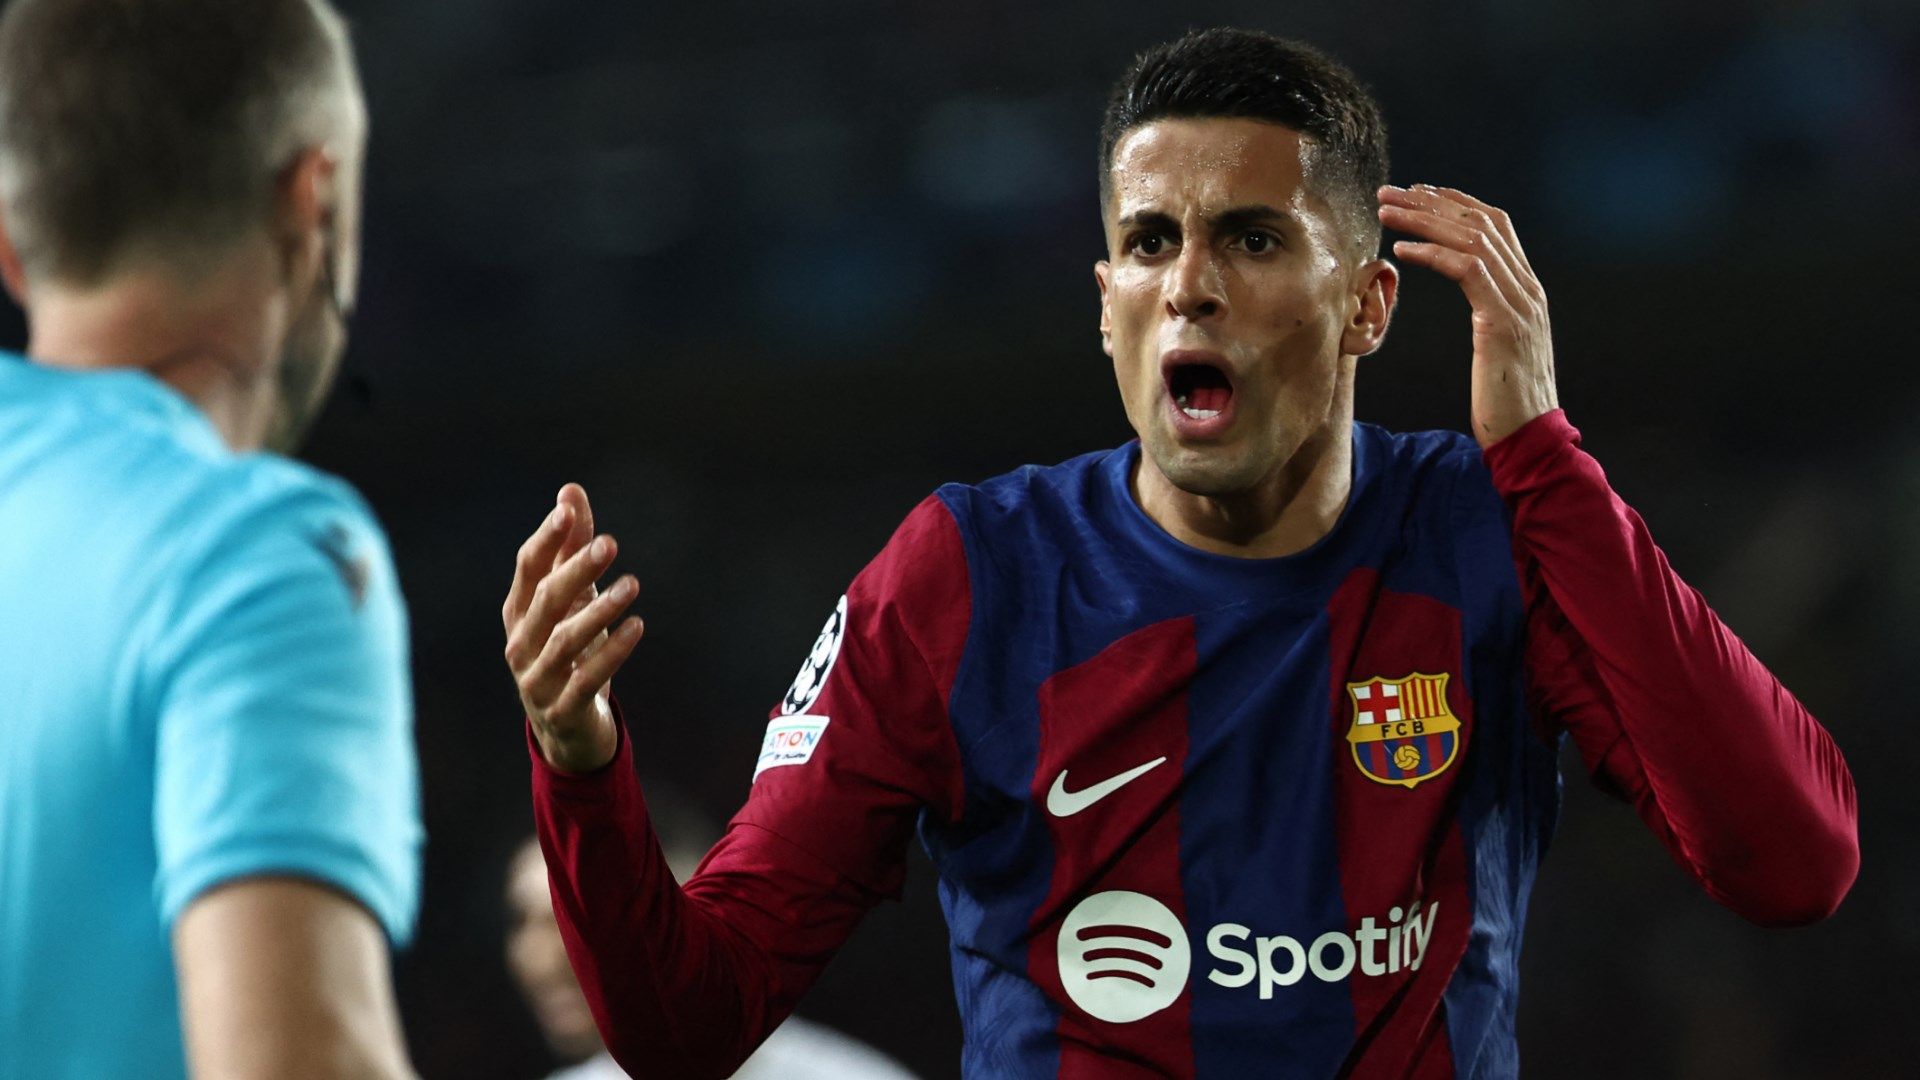 kicked out by pep guardiola, snubbed by bayern munich and in the firing line at barcelona - what next for man city outcast joao cancelo?